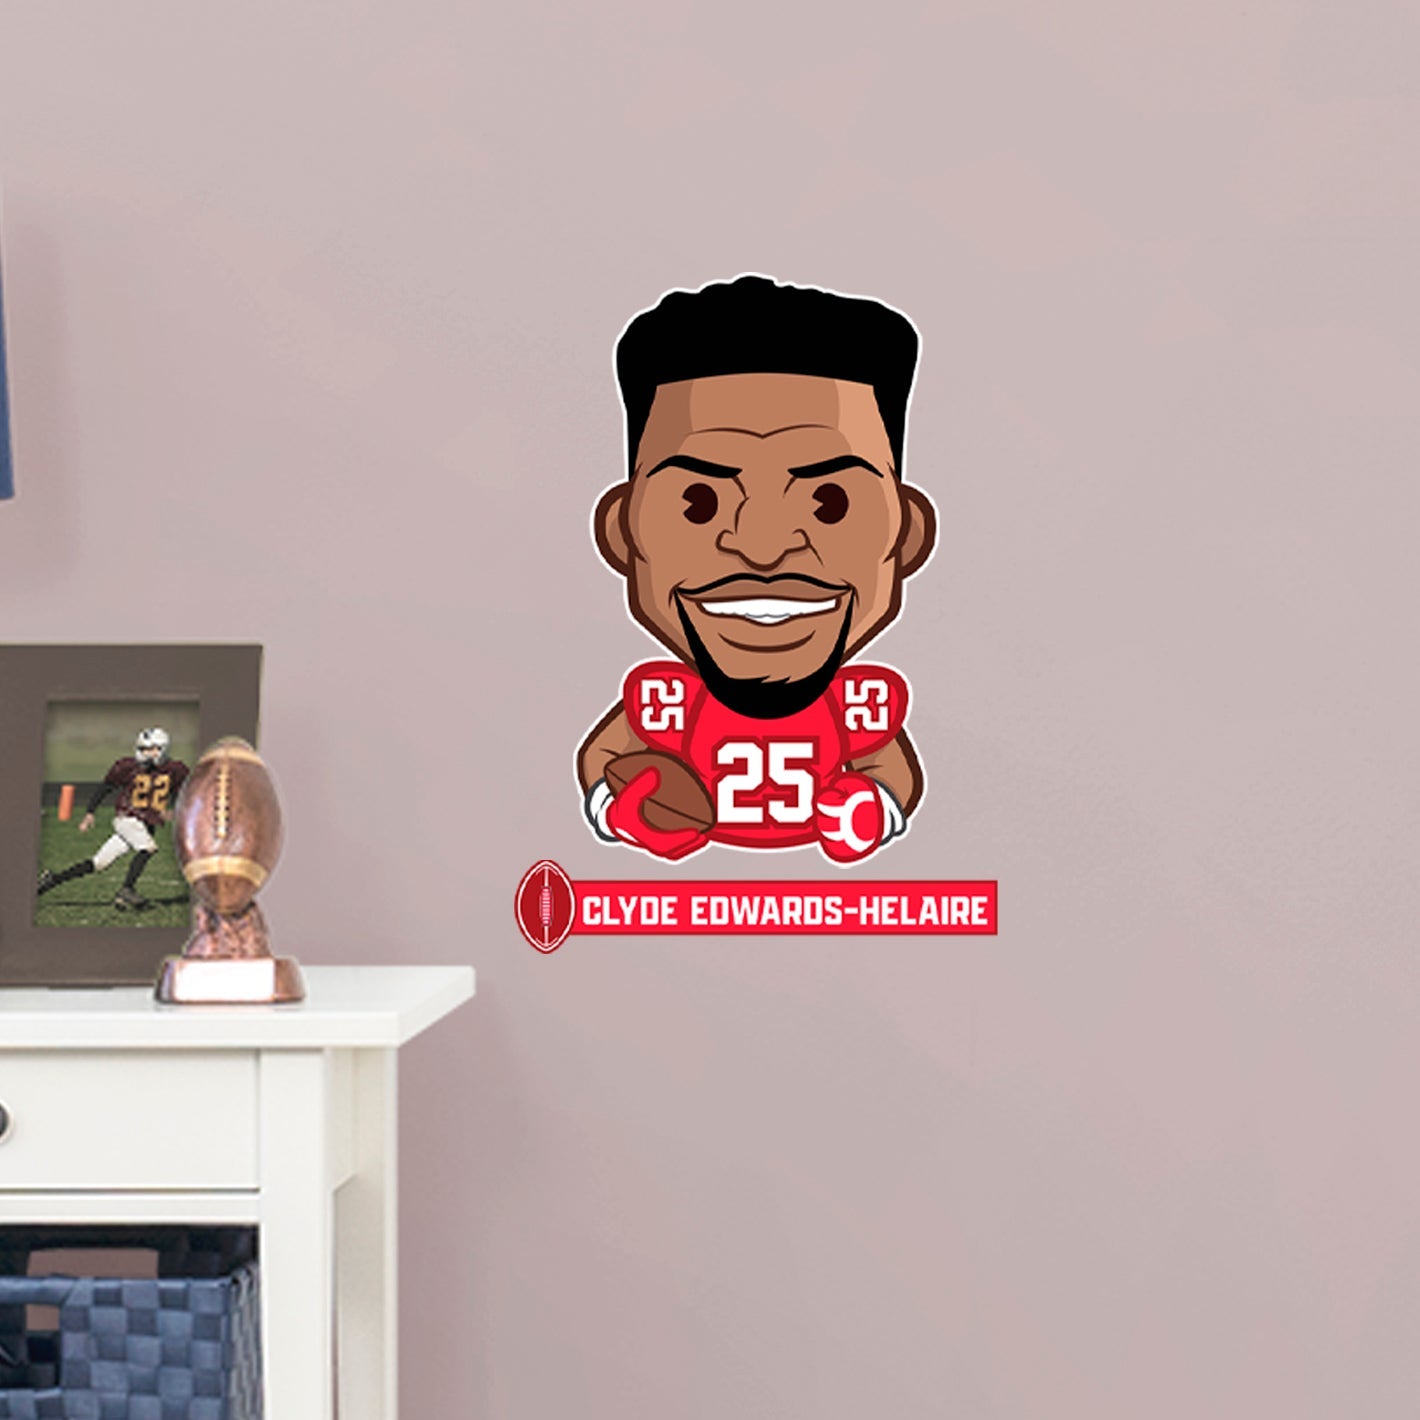 Kansas City Chiefs: Clyde Edwards-Helaire Emoji - Officially Licensed NFLPA Removable Adhesive Decal